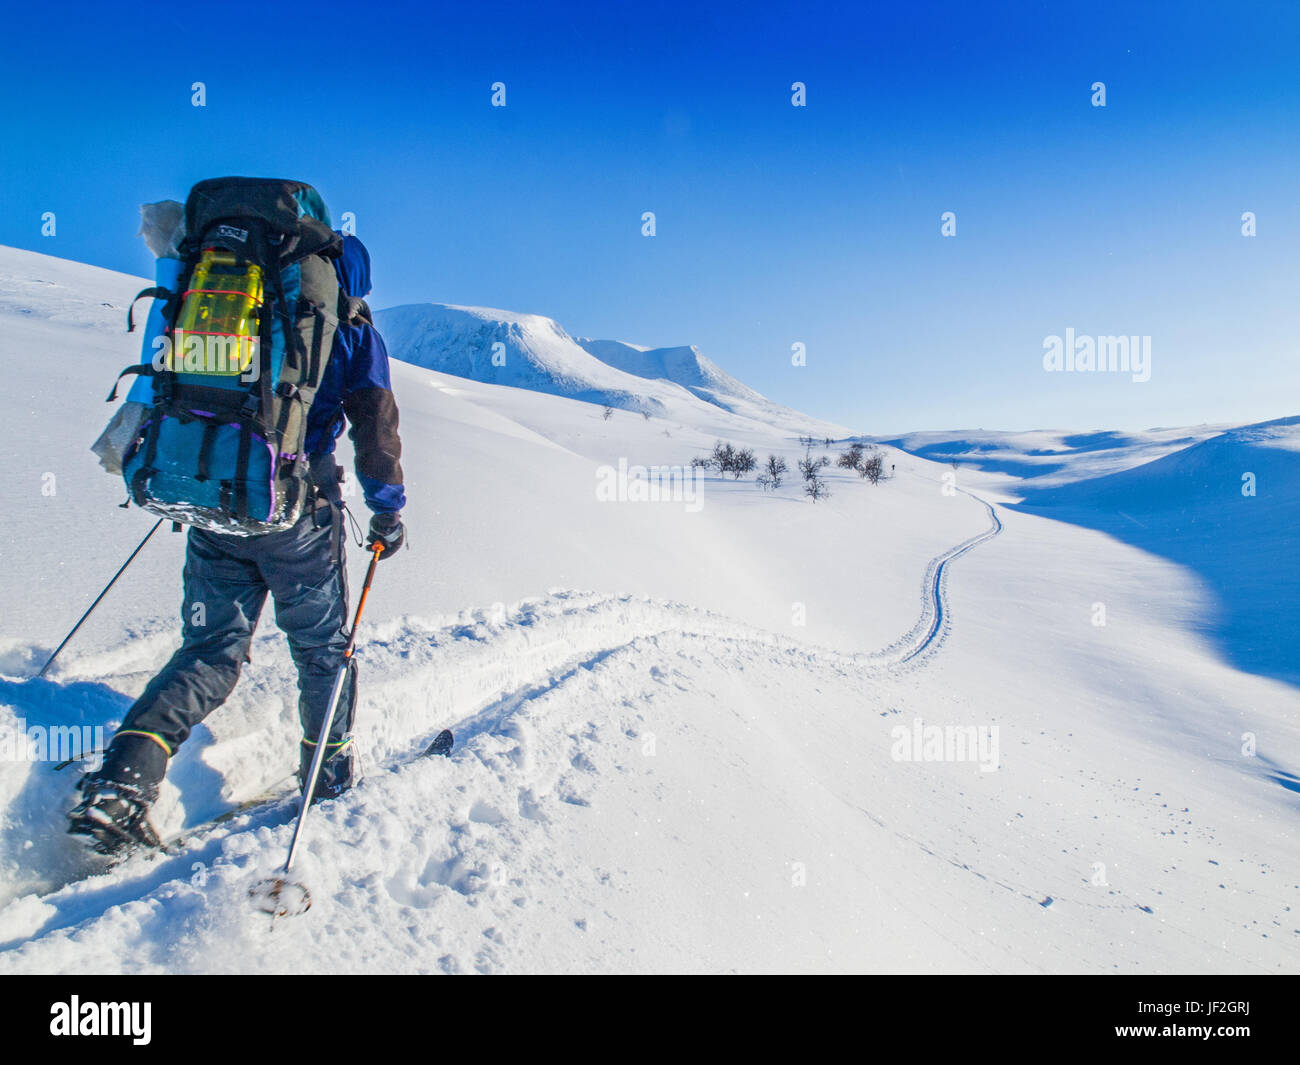 A backcountry skier in the Troms region of Northern Norway Stock Photo